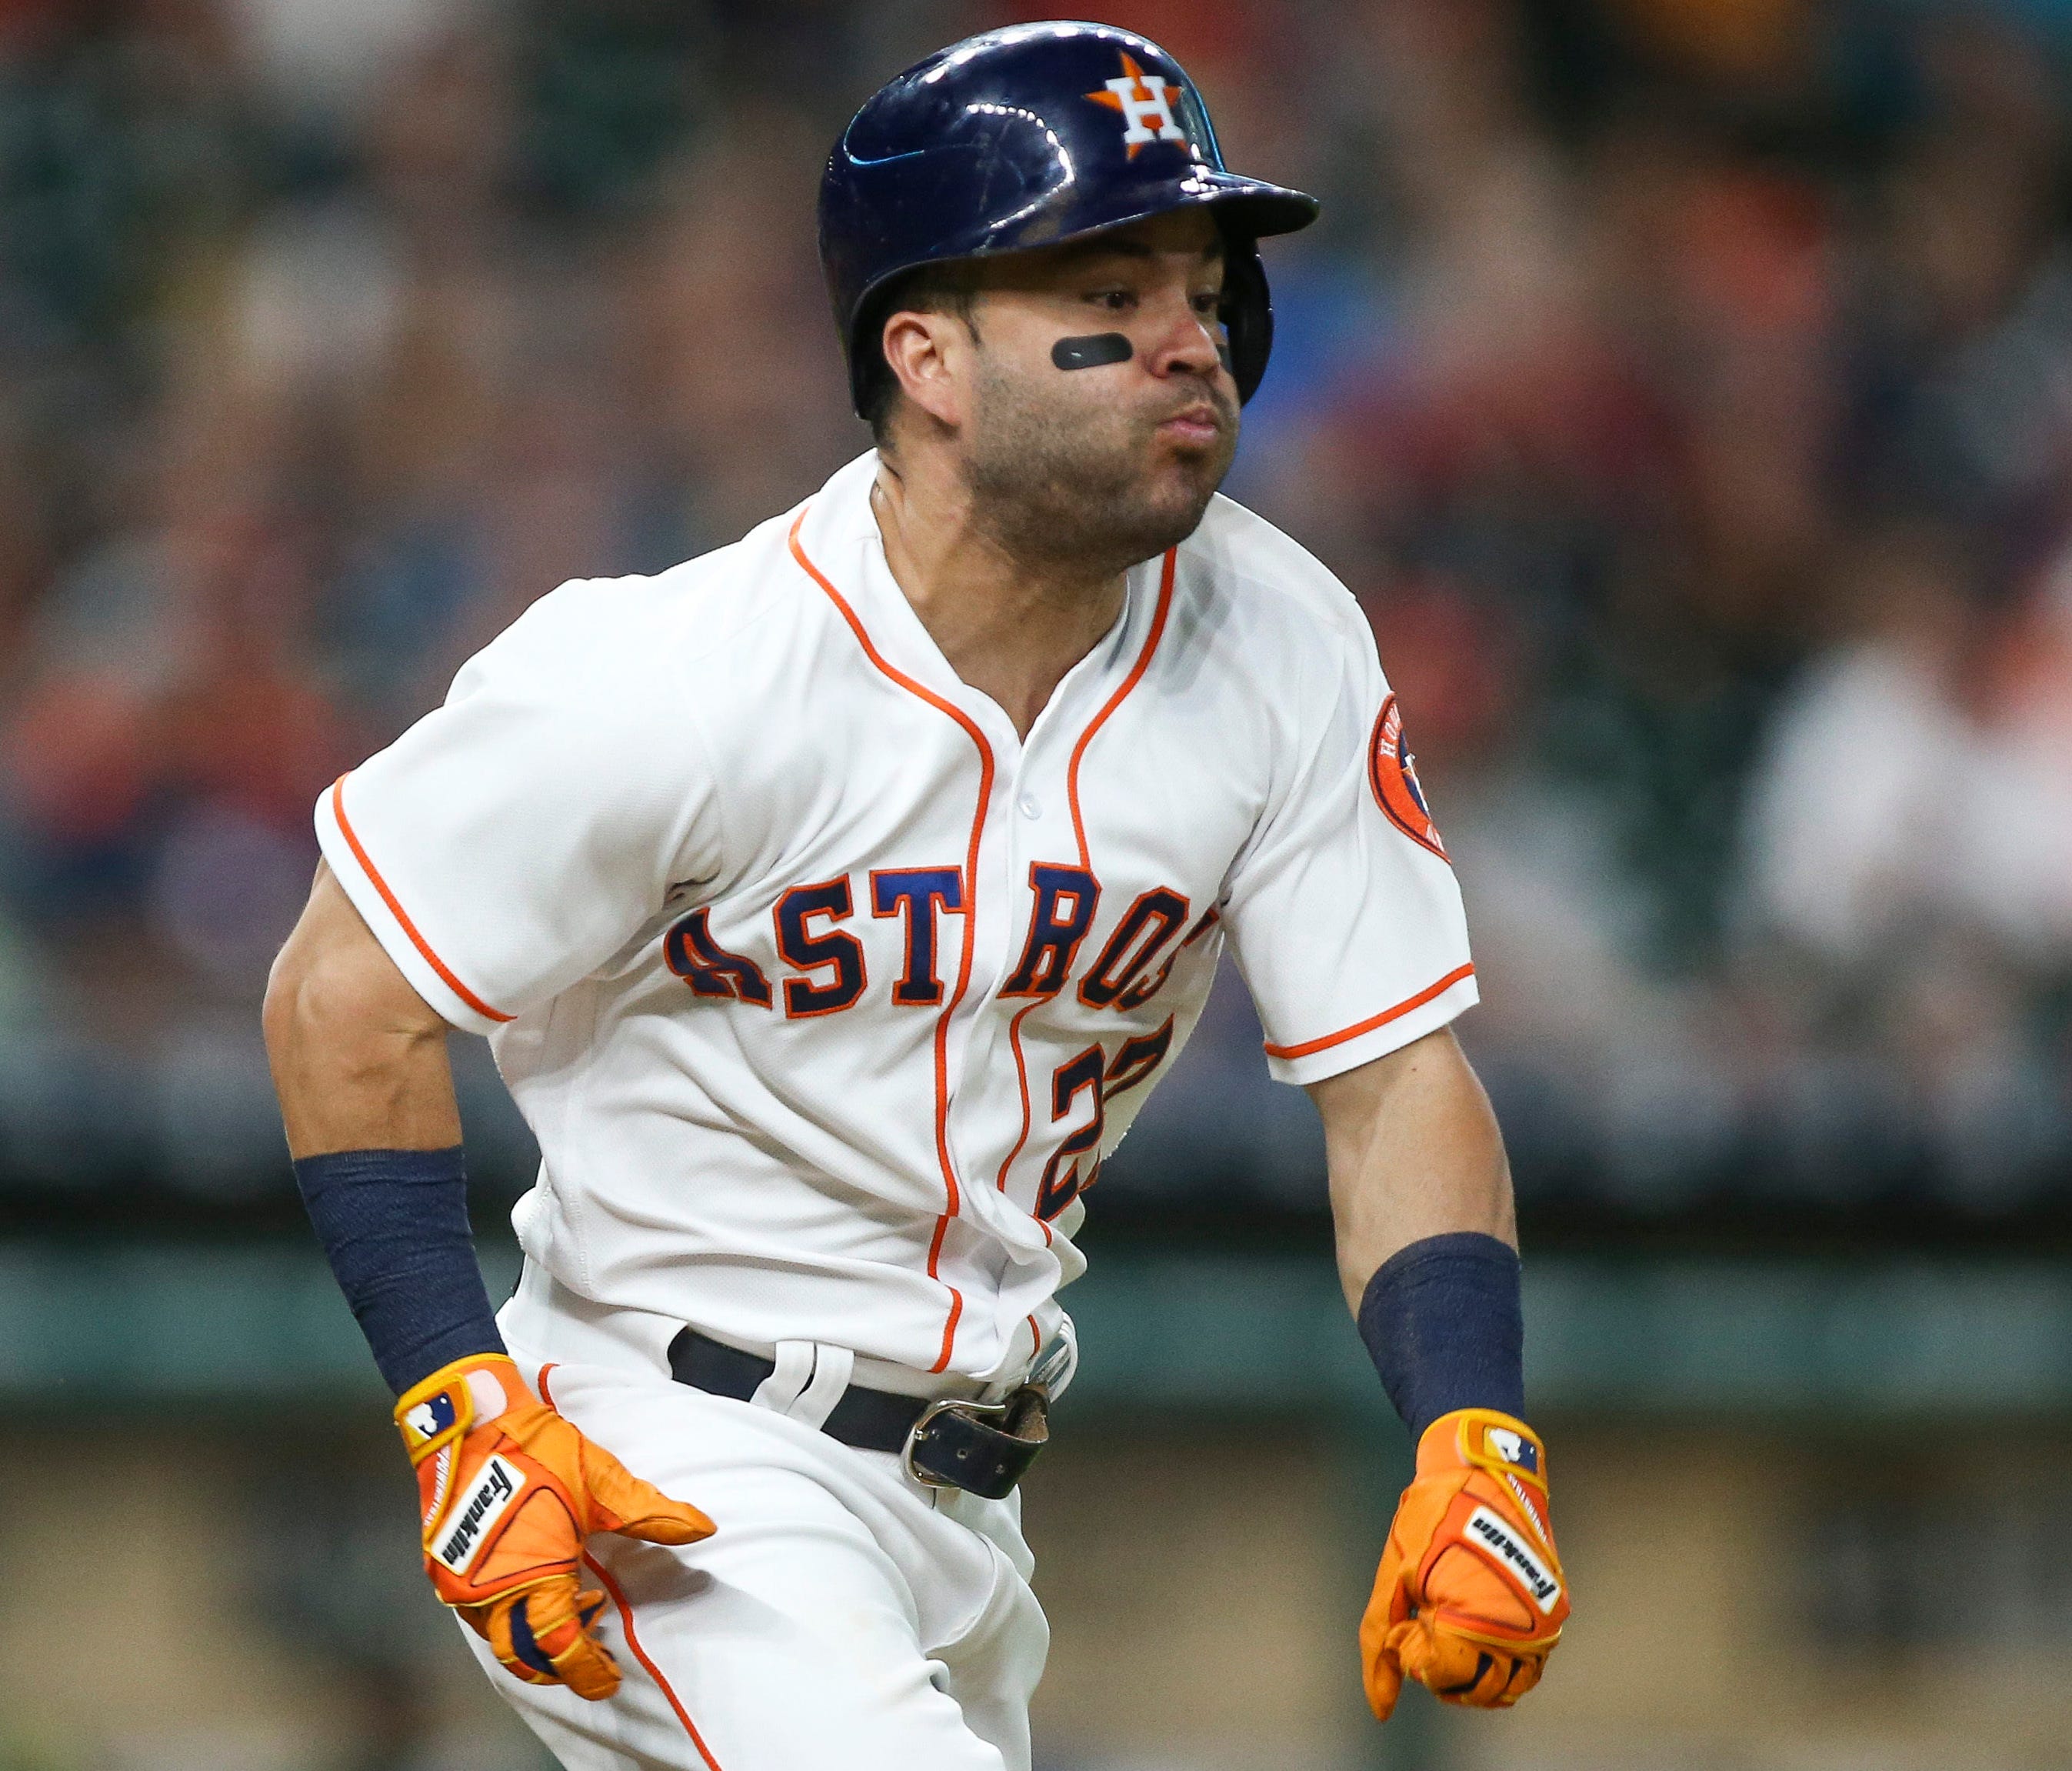 Houston Astros second baseman Jose Altuve hits an infield single during the third inning against the Oakland Athletics at Minute Maid Park.